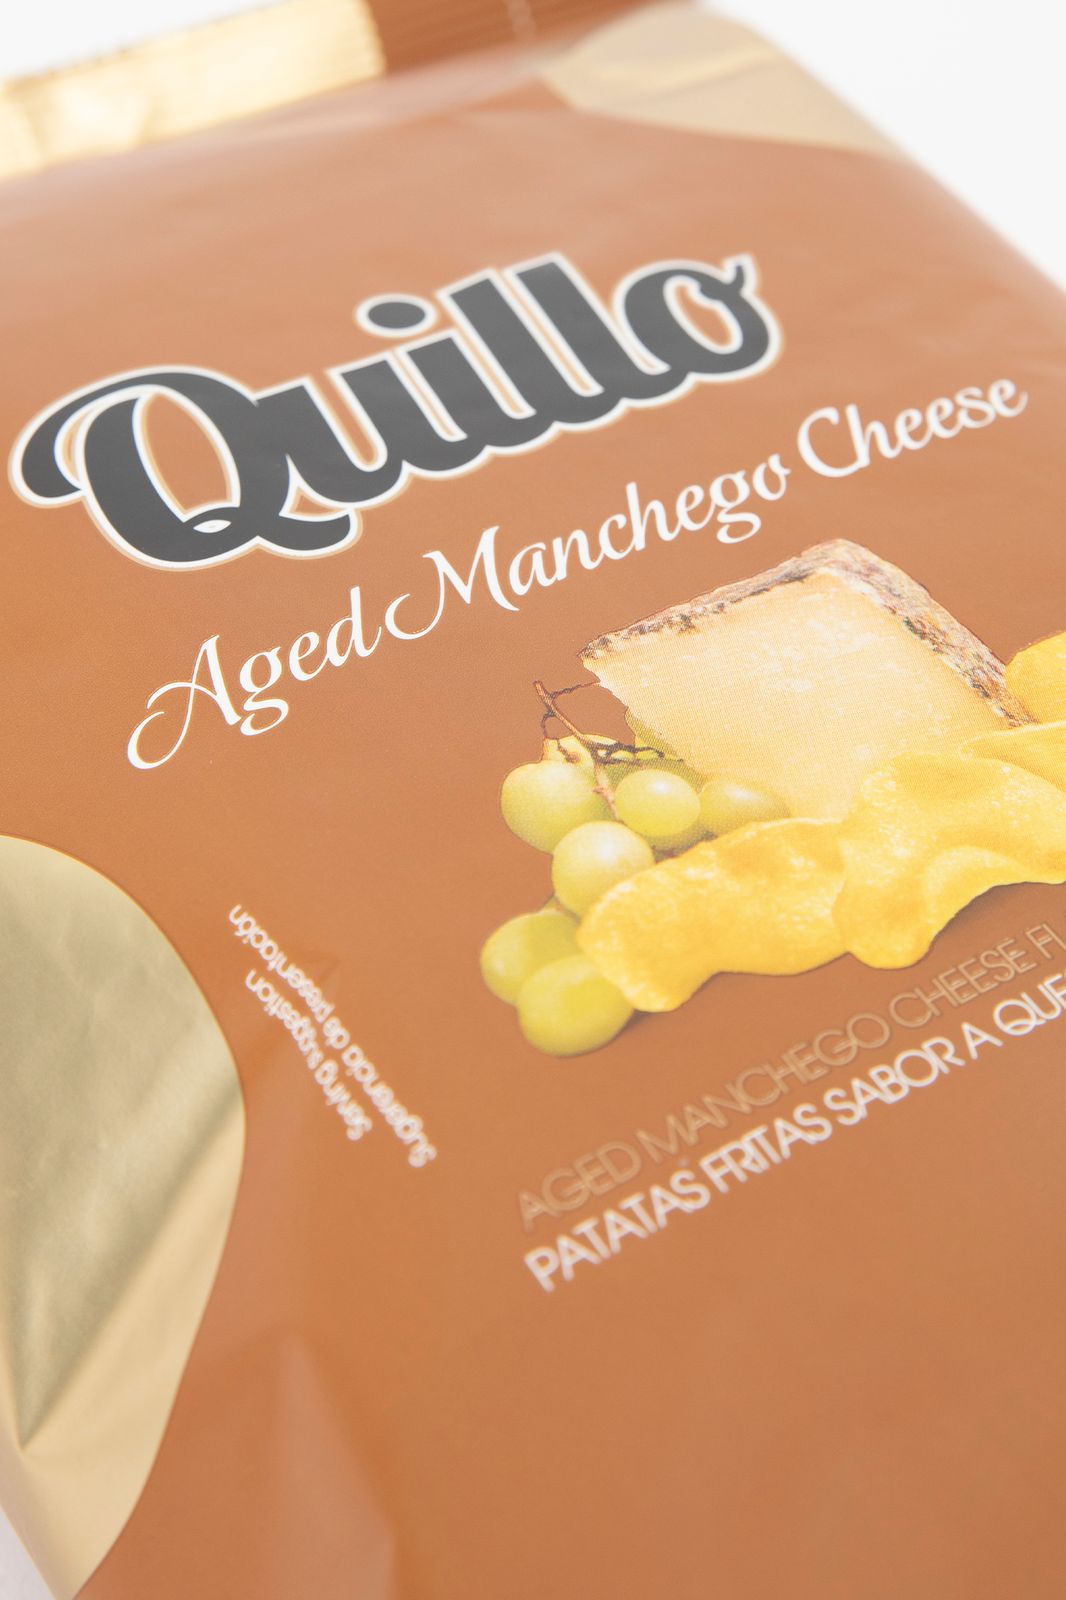 Quillo chips manchego cheese